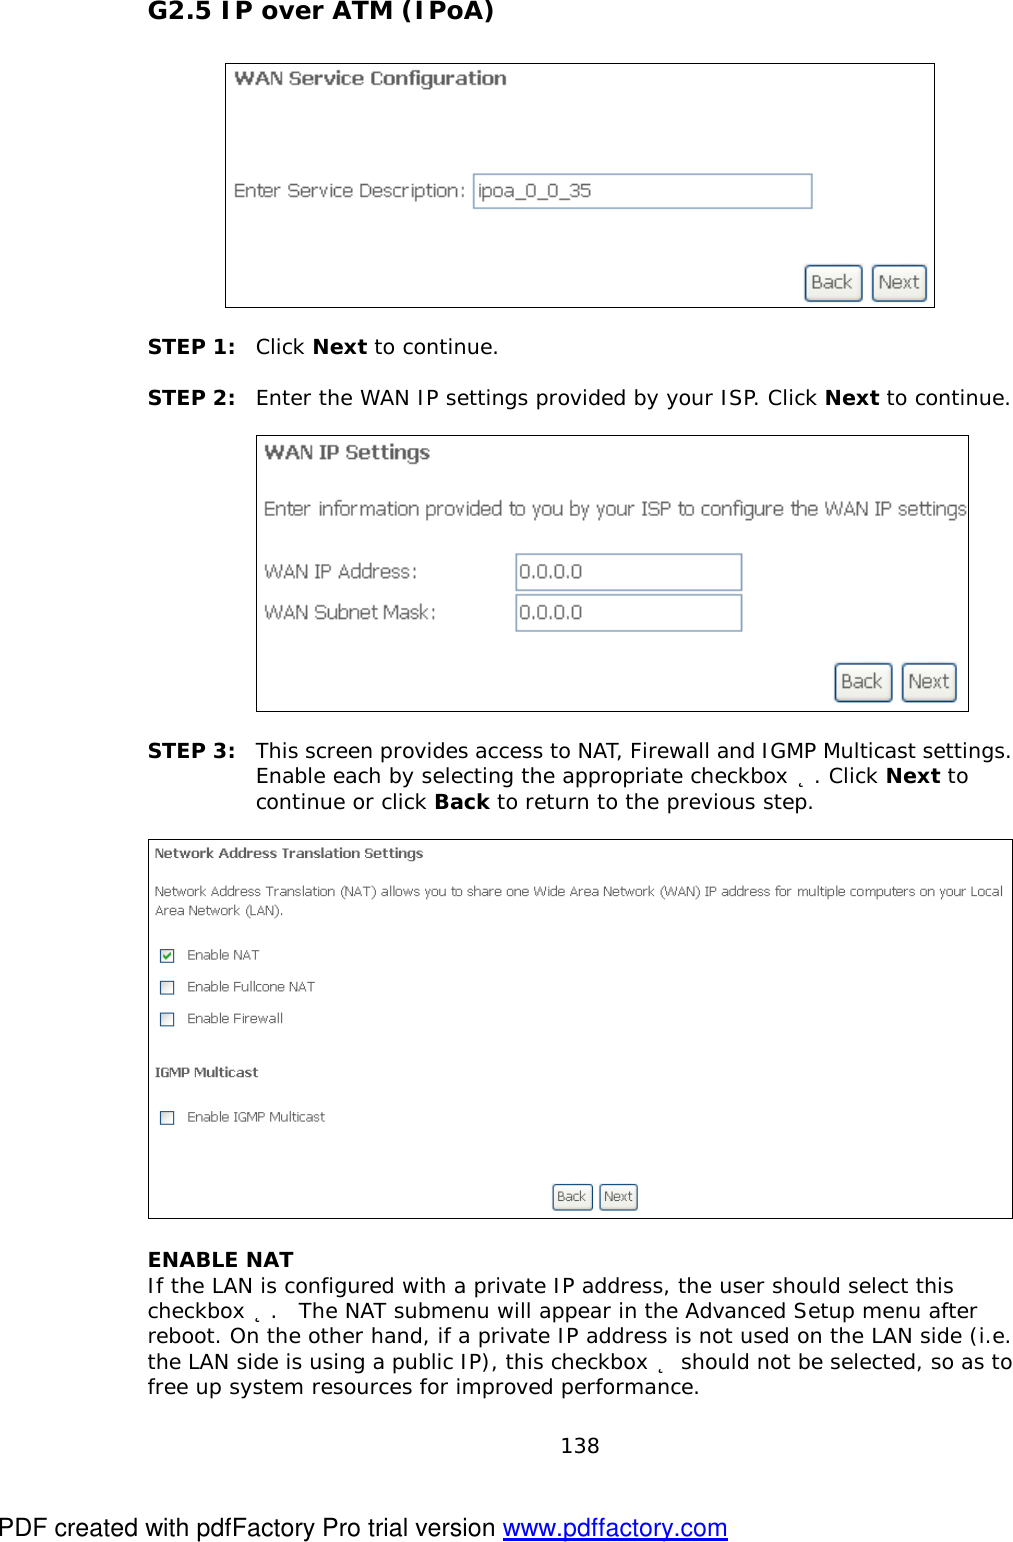  138 G2.5 IP over ATM (IPoA)   STEP 1:  Click Next to continue.  STEP 2:  Enter the WAN IP settings provided by your ISP. Click Next to continue.      STEP 3:  This screen provides access to NAT, Firewall and IGMP Multicast settings. Enable each by selecting the appropriate checkbox þ. Click Next to continue or click Back to return to the previous step.   ENABLE NAT If the LAN is configured with a private IP address, the user should select this checkbox þ.  The NAT submenu will appear in the Advanced Setup menu after reboot. On the other hand, if a private IP address is not used on the LAN side (i.e. the LAN side is using a public IP), this checkbox þ should not be selected, so as to free up system resources for improved performance. PDF created with pdfFactory Pro trial version www.pdffactory.com